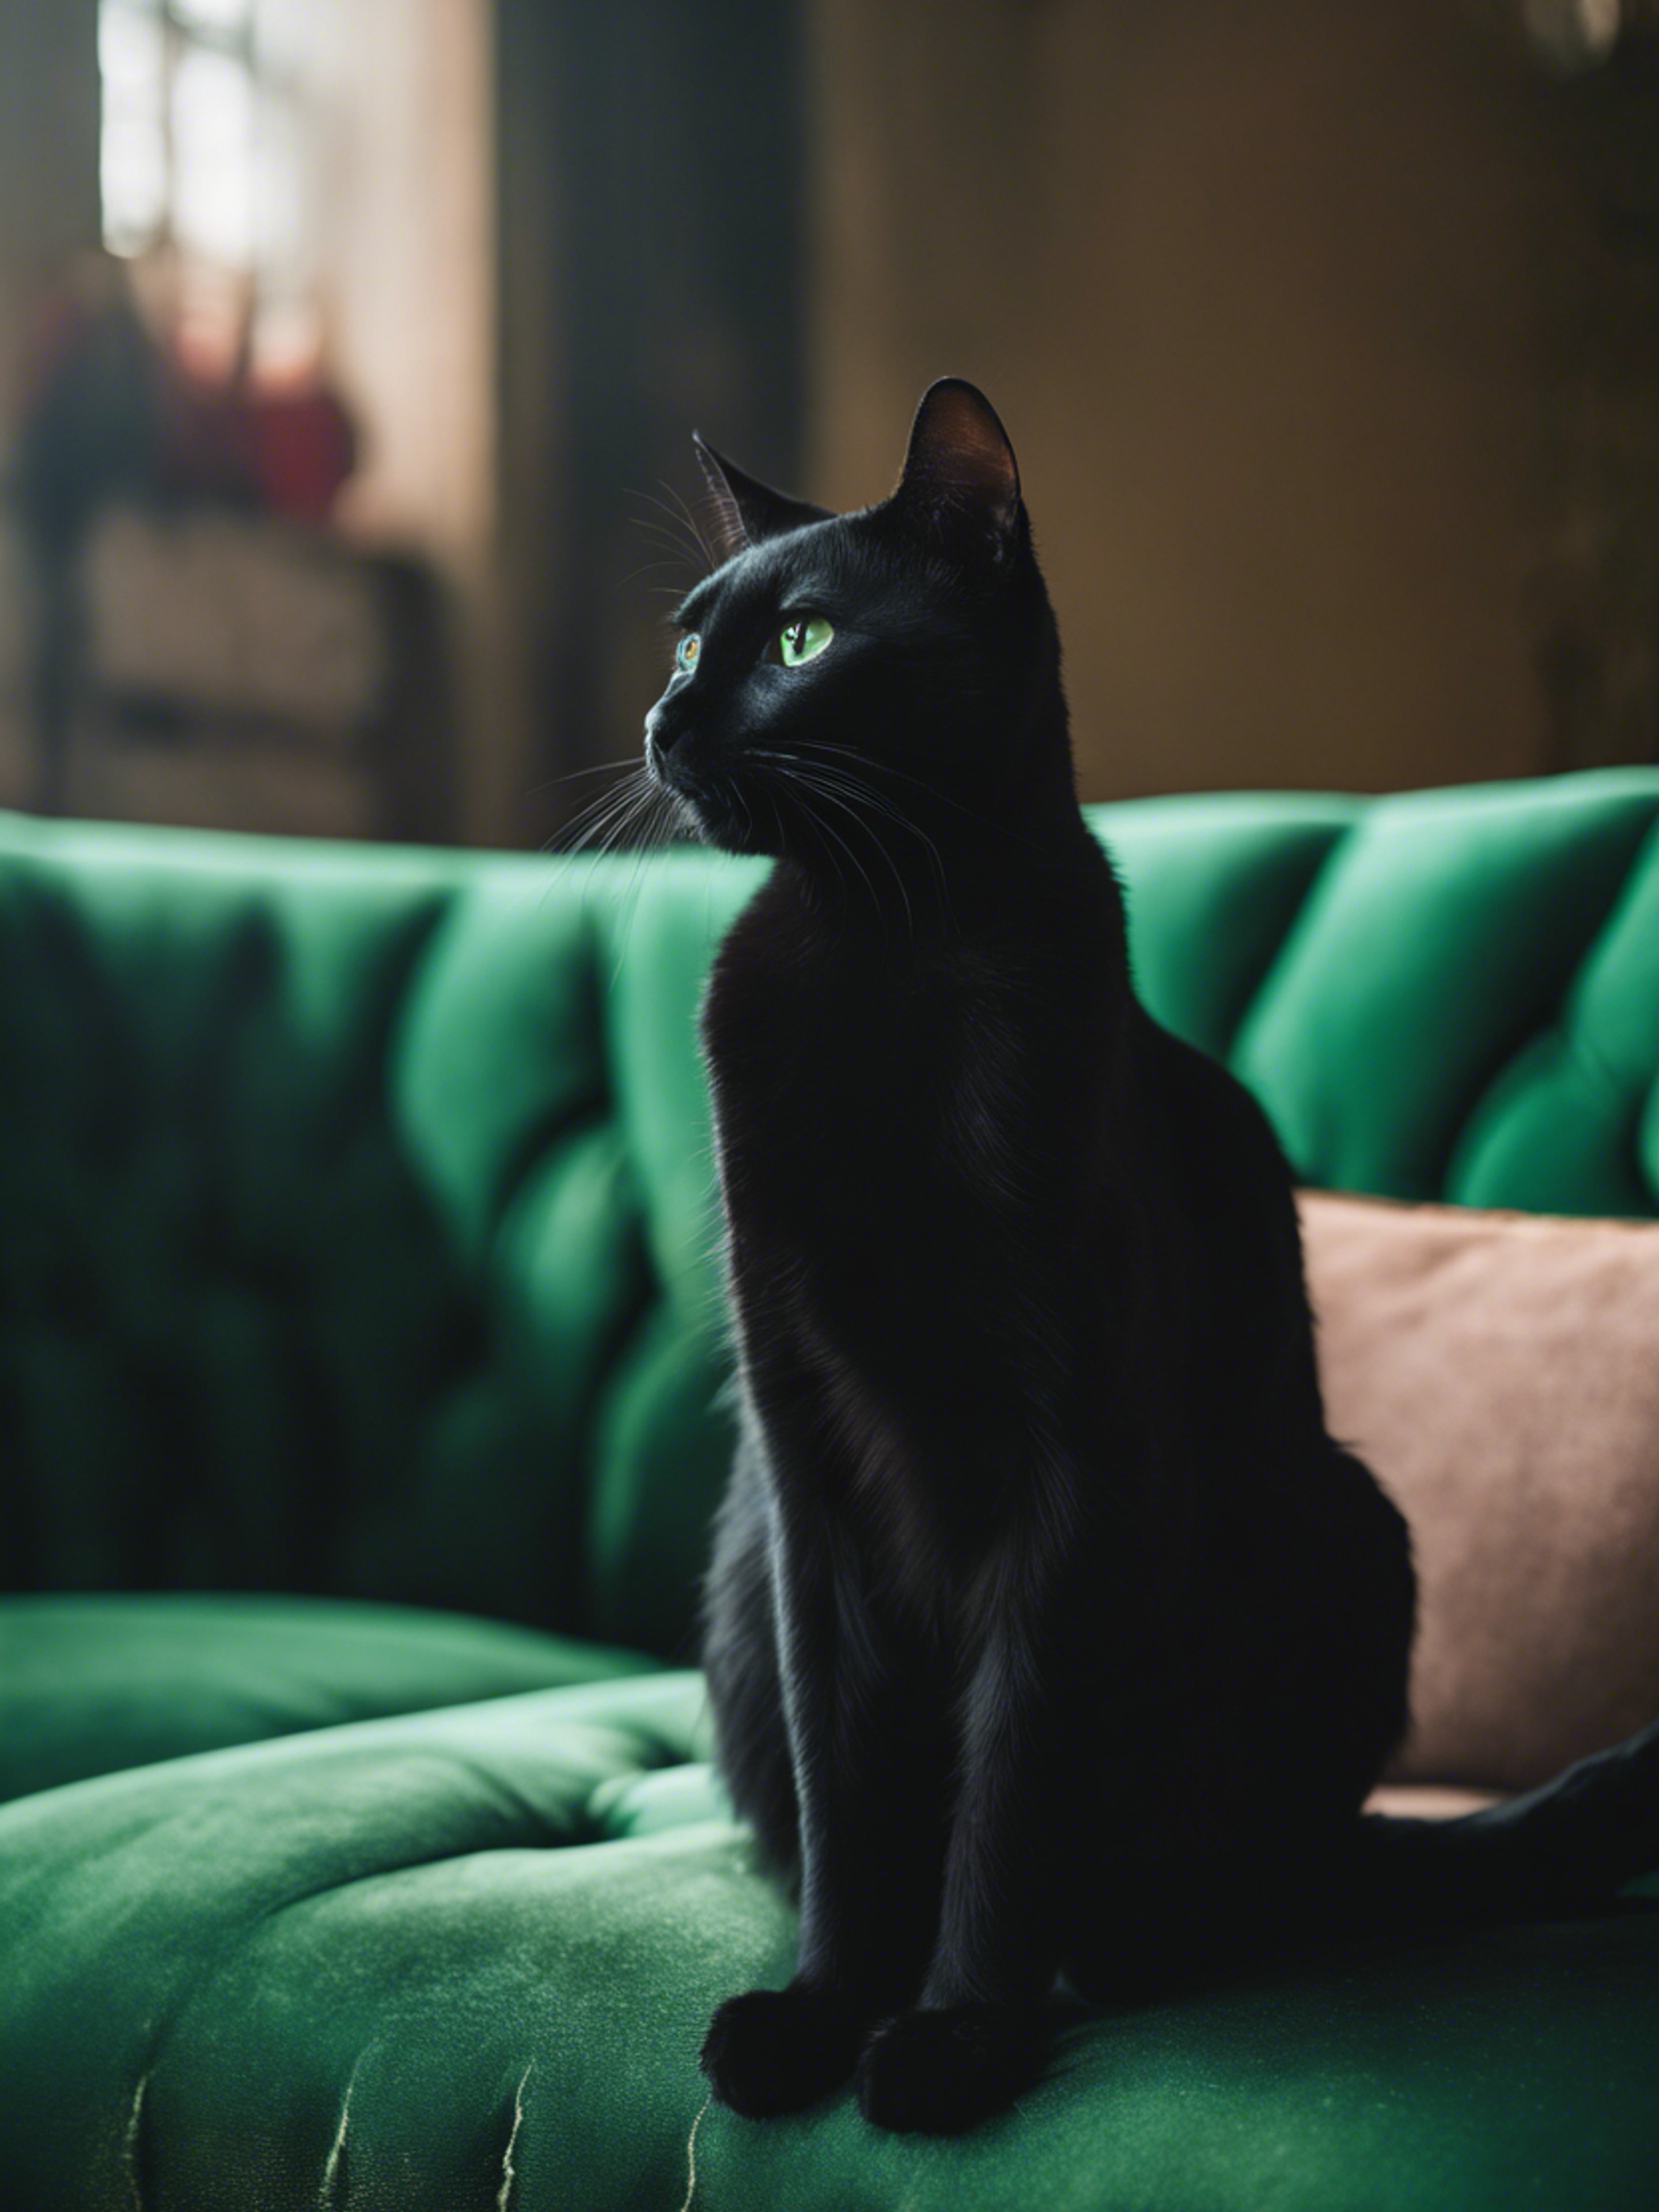 A black cat with piercing green eyes sitting on a green velvet couch. Wallpaper[61aab3055c844601bd57]